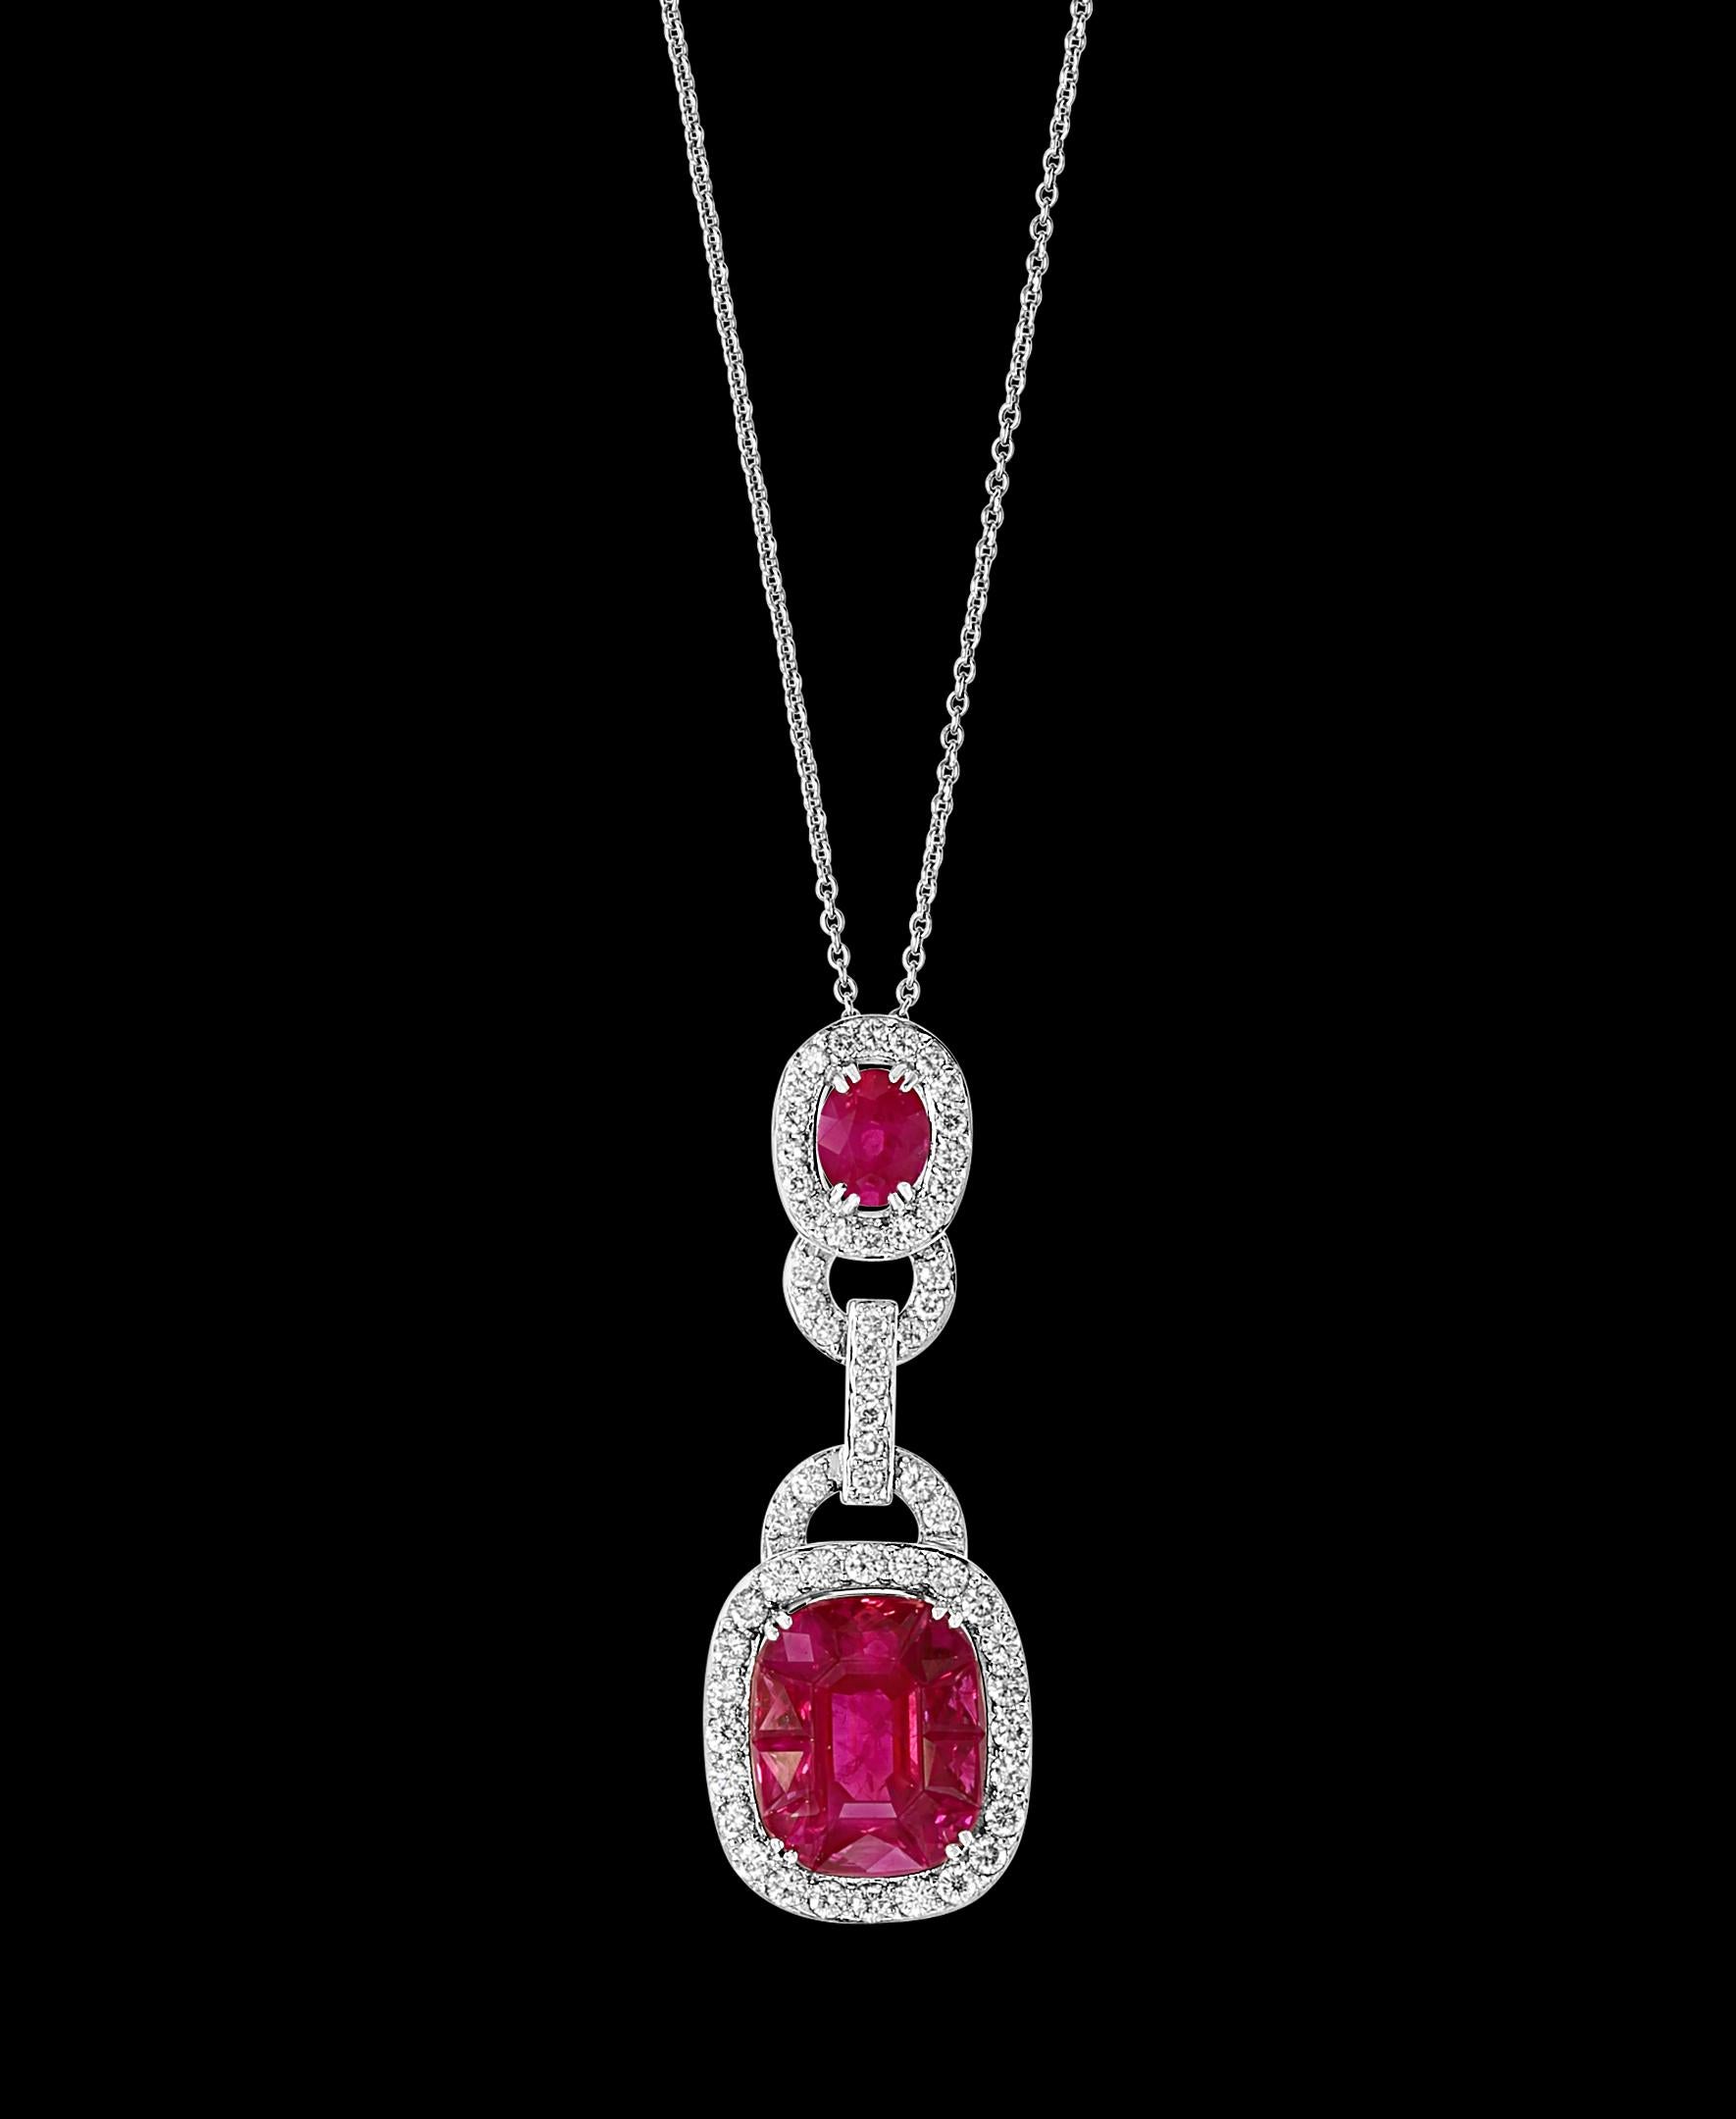 Women's 3.5 Carat Natural Burma Ruby and Diamond Pendant or Necklace in 18 Karat Gold For Sale